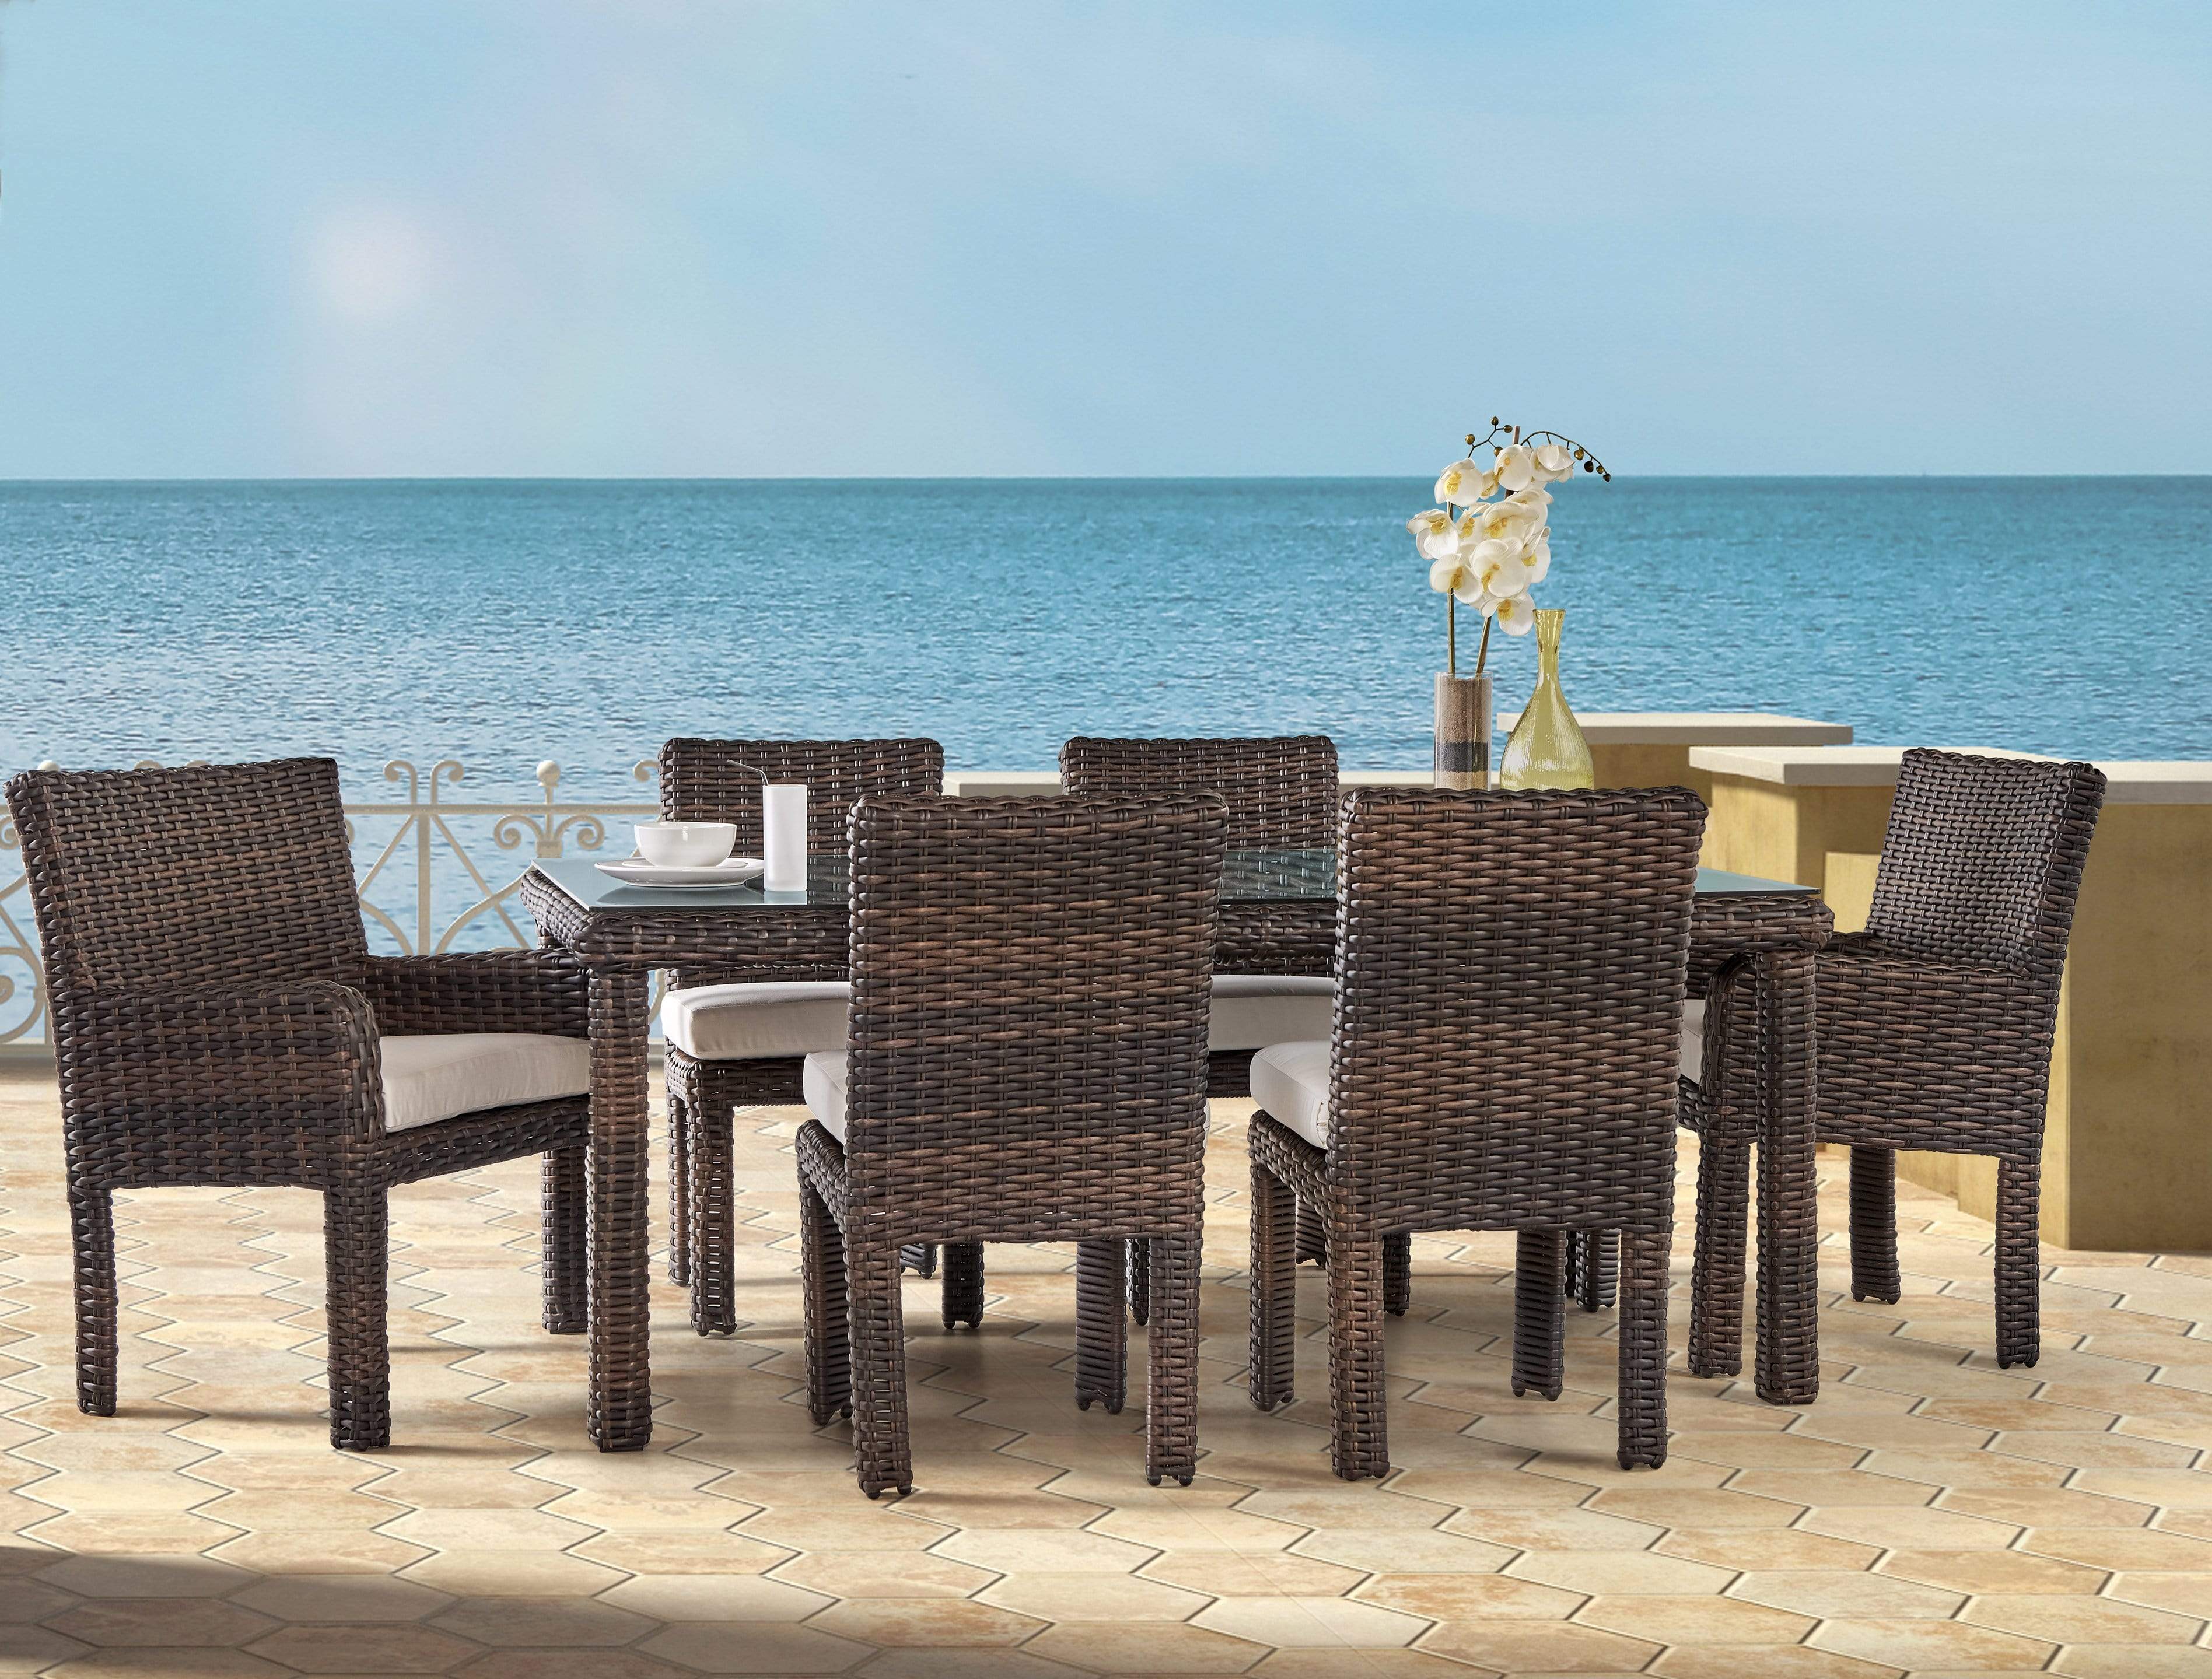 South Sea Outdoor Living Outdoor Dining Table Default Color / Tobacco brown TOB St. Tropez Rectangular Dining Table